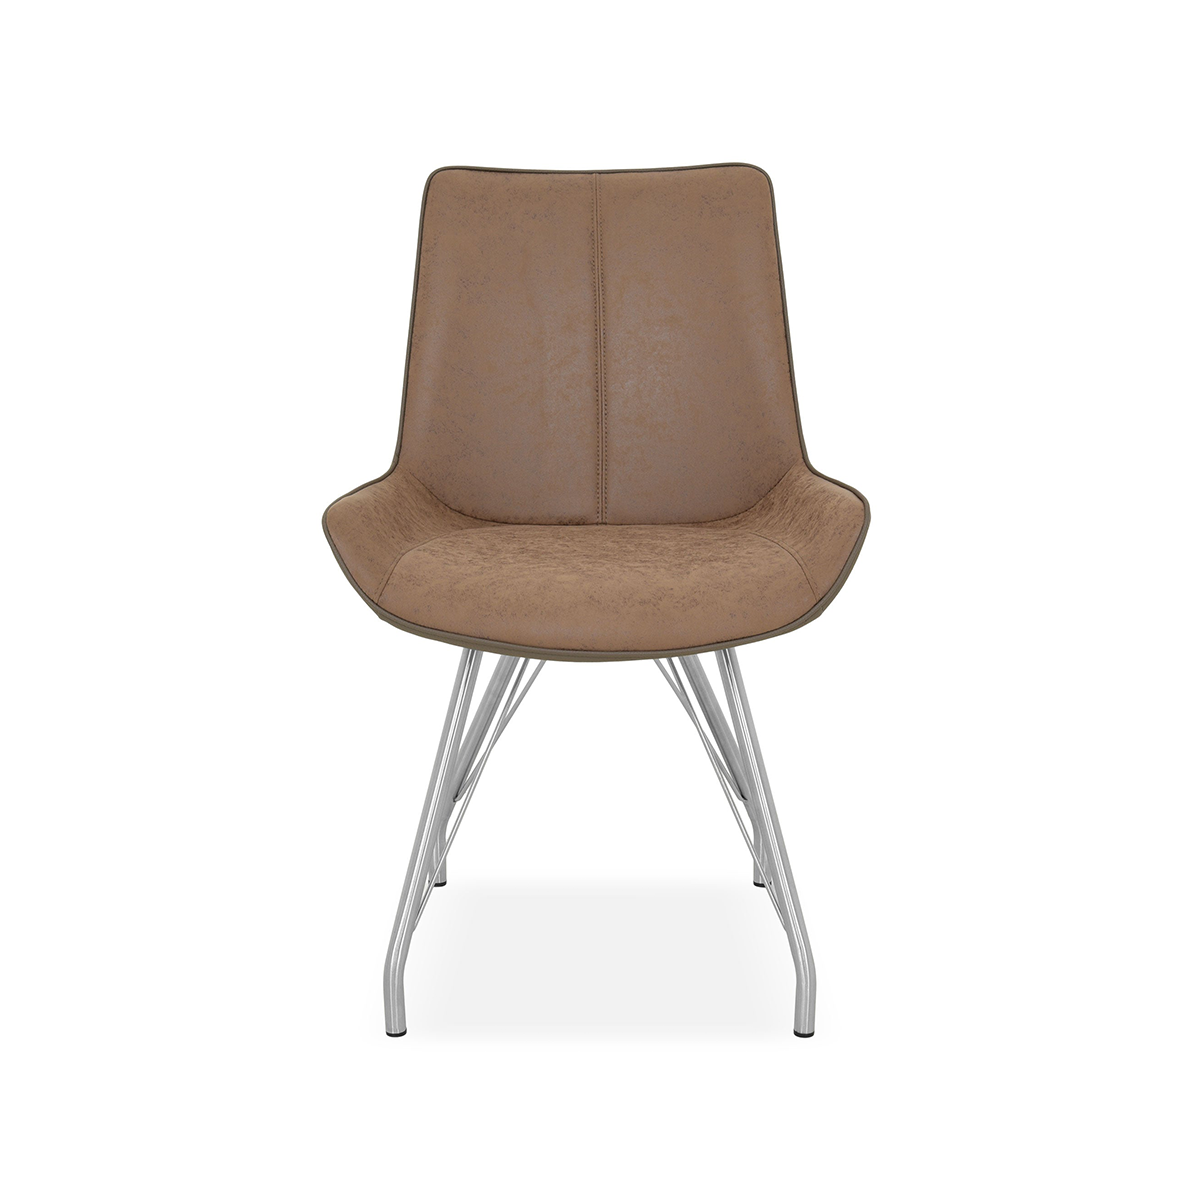 Fondhouse Borry Dining Chair